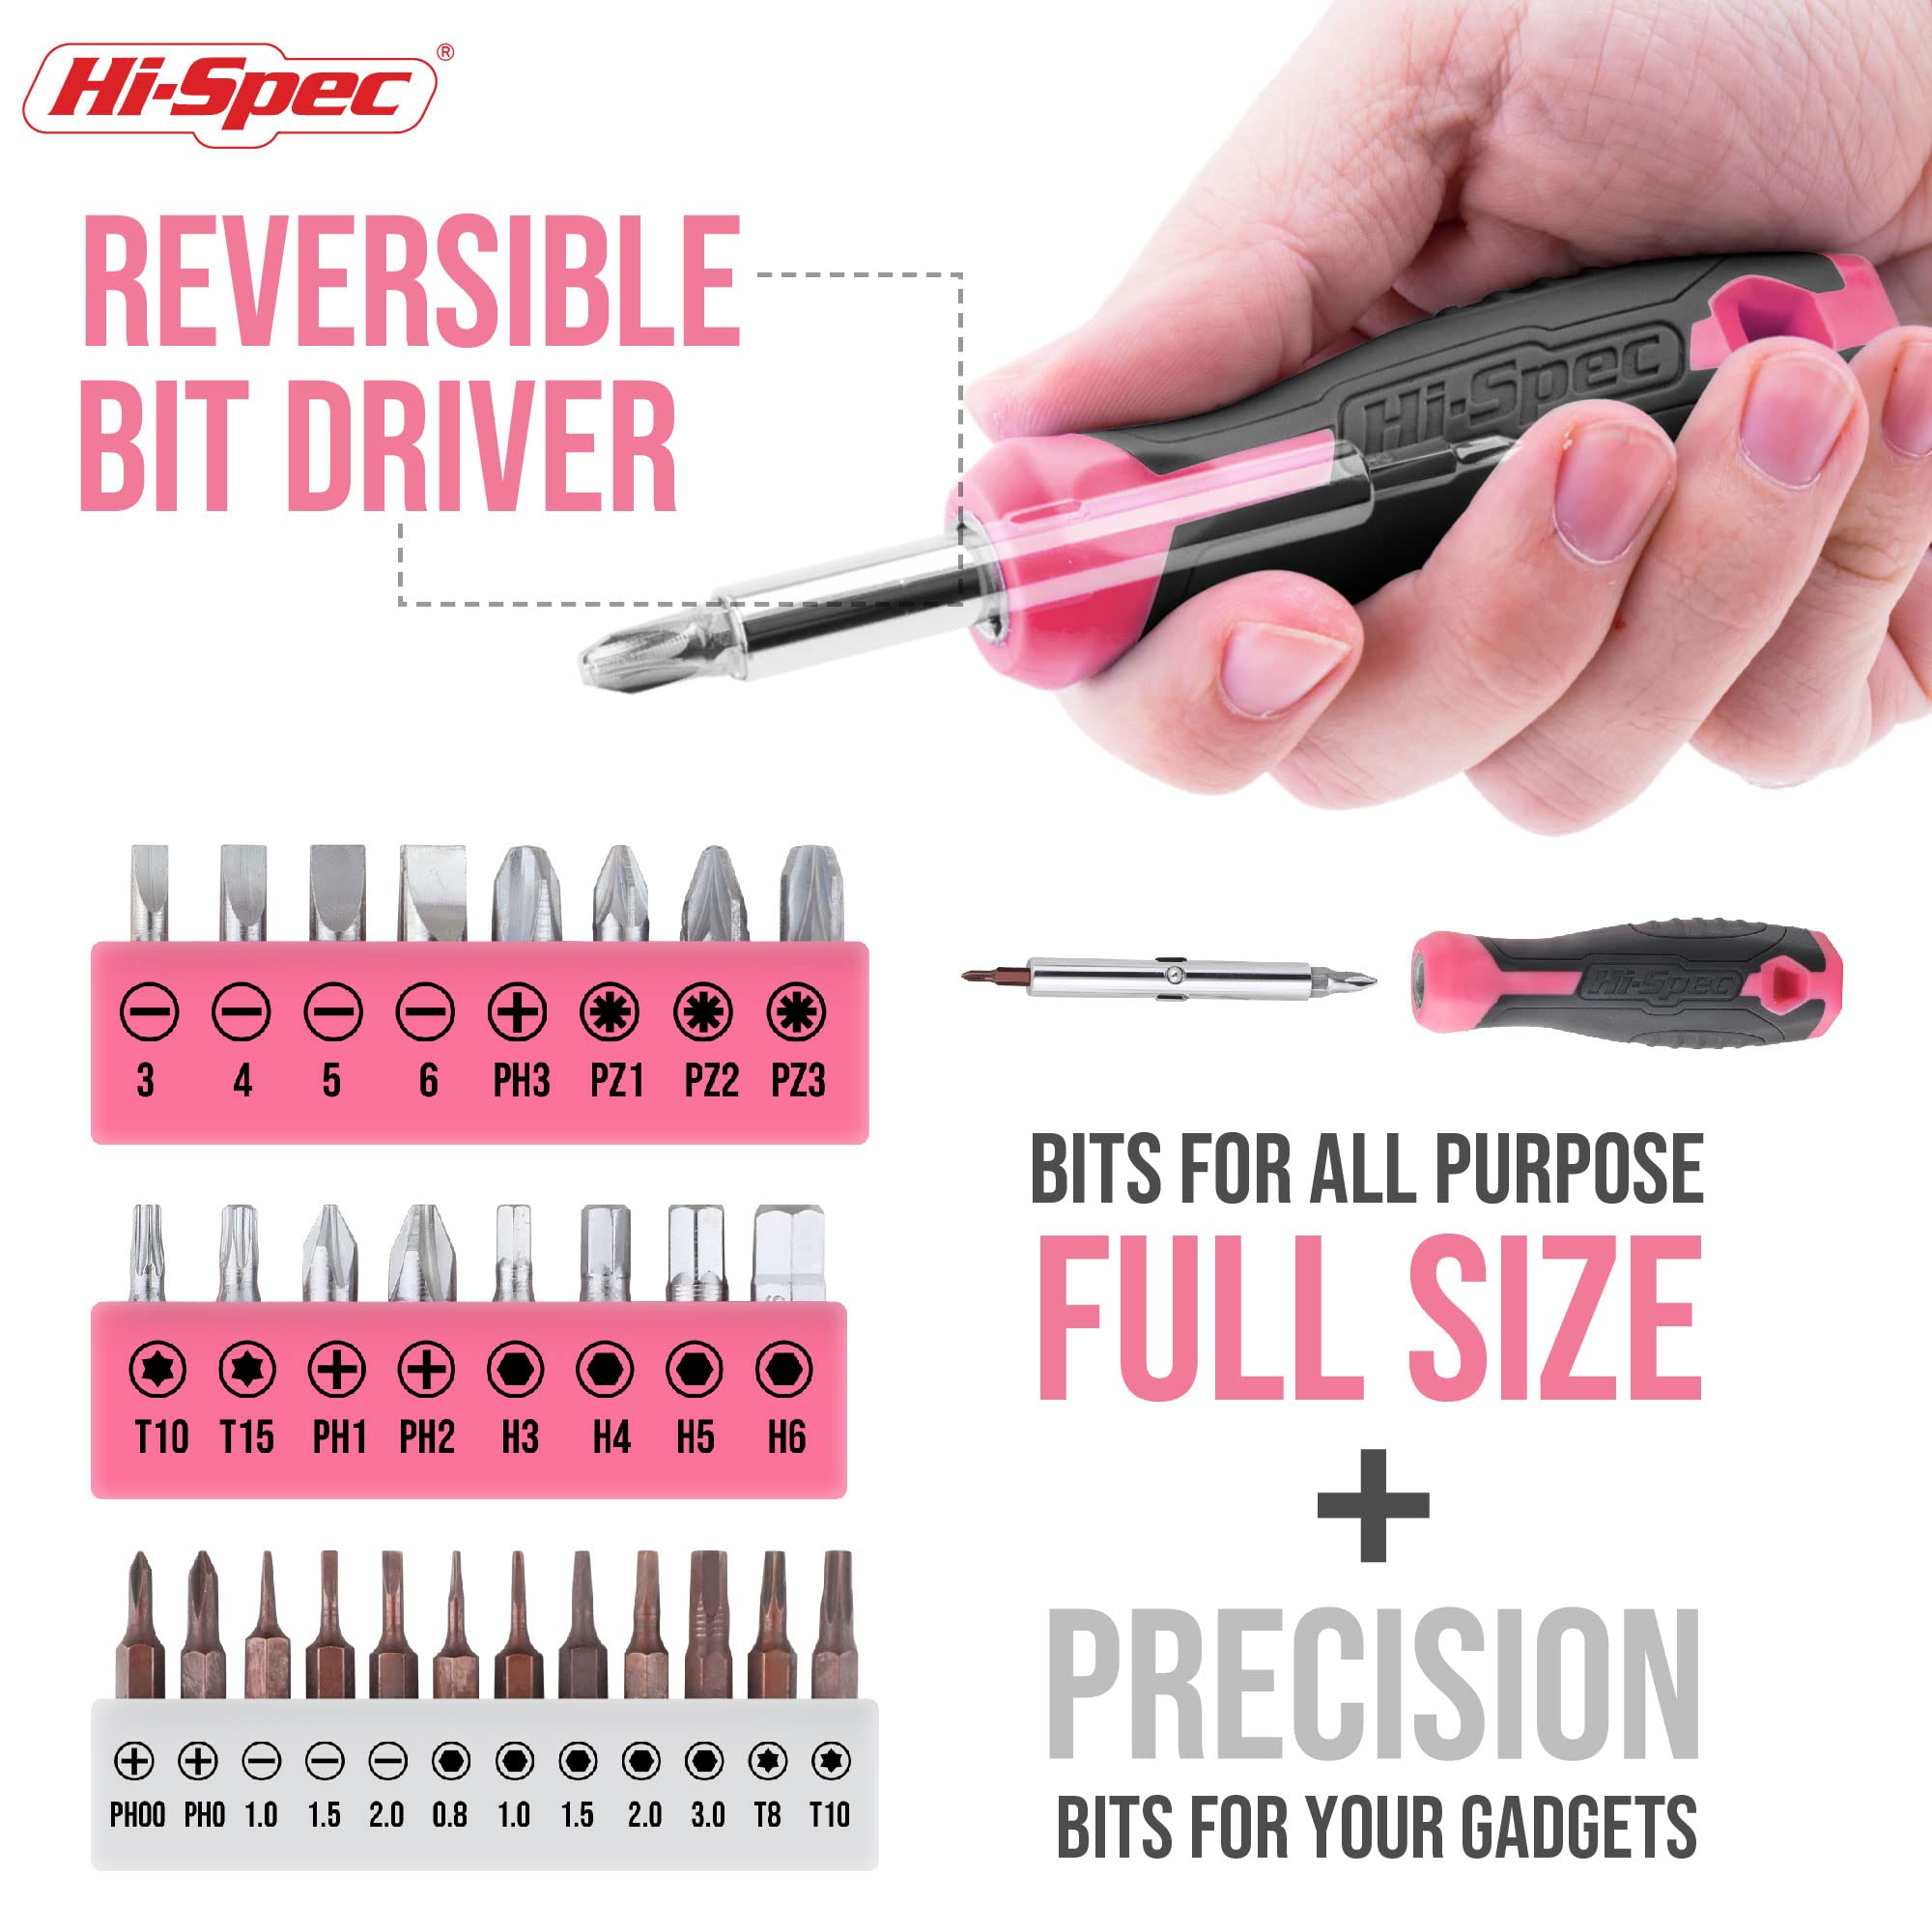 Hi-Spec 42pc Pink Household DIY Tool Set for Women. Home, Office and College Dorm Small Tool Kit of Starter Basic Ladies Tools